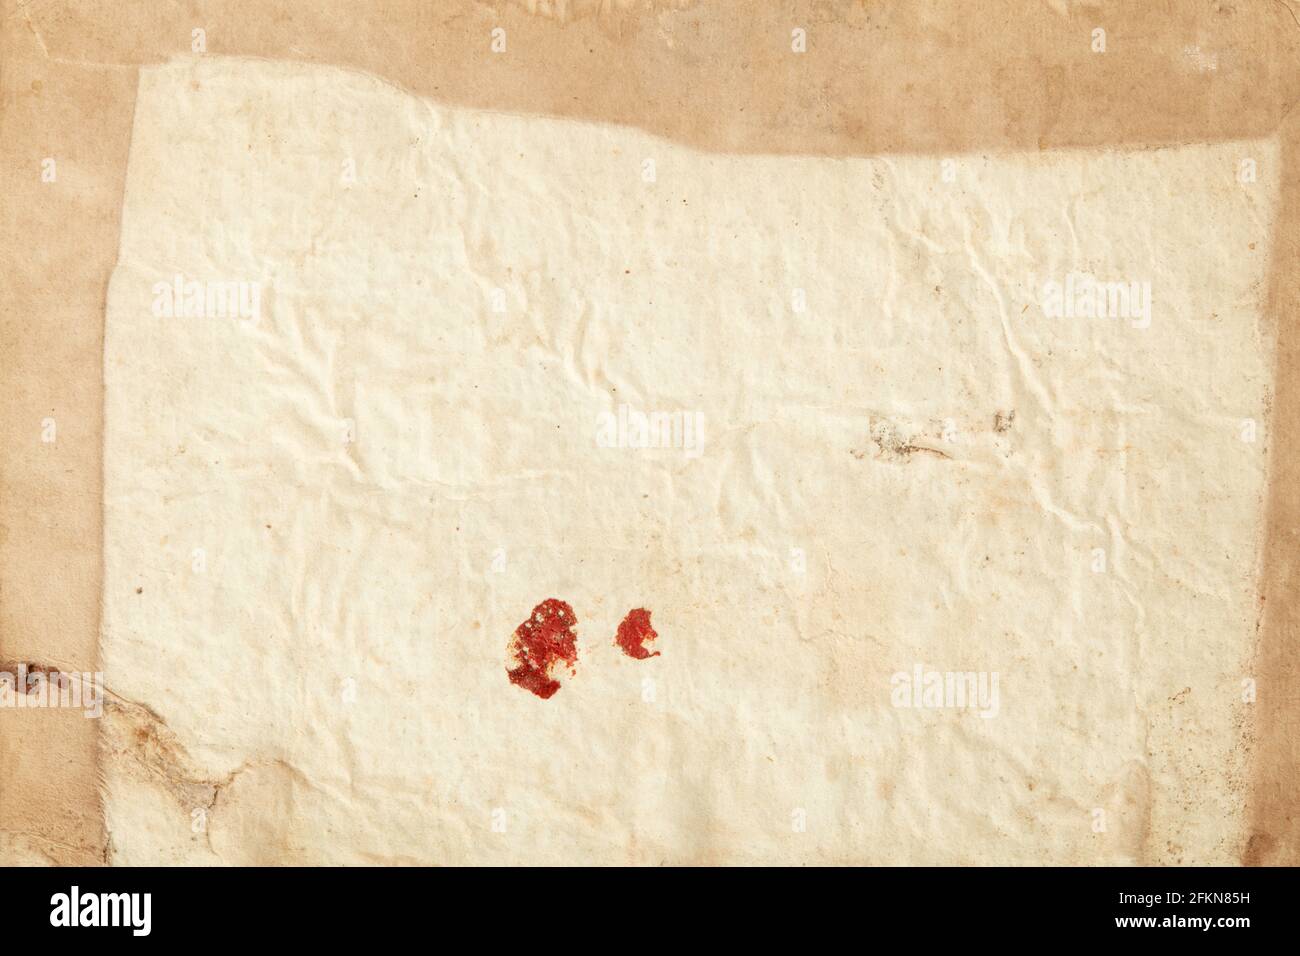 Old, crumpled paper with red sealing wax sign texture background Stock Photo